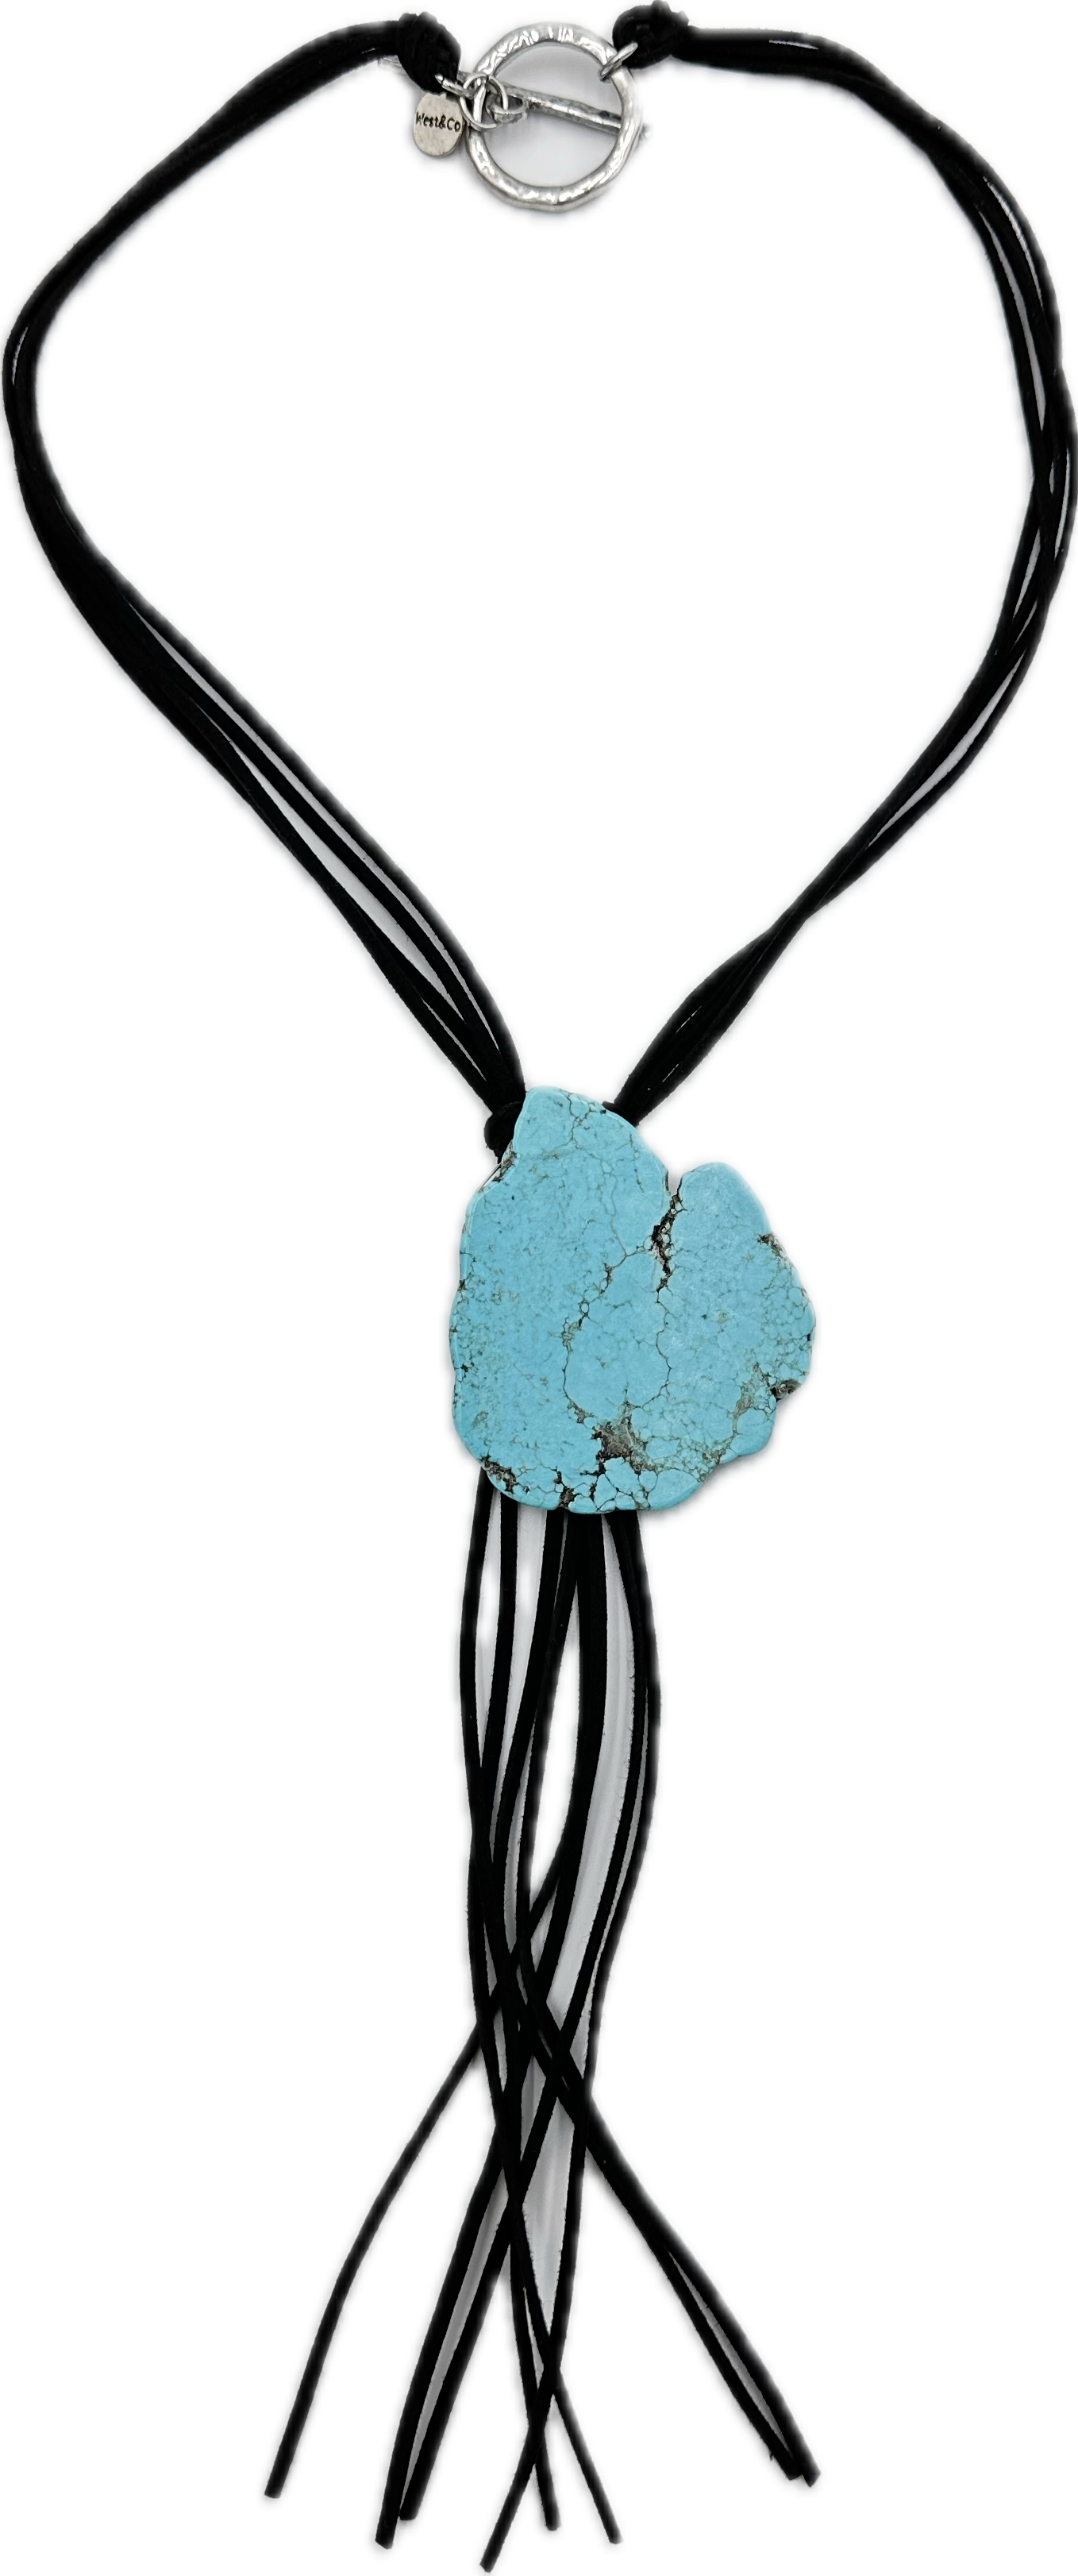 Leather Strung Necklace Turquoise Pendant